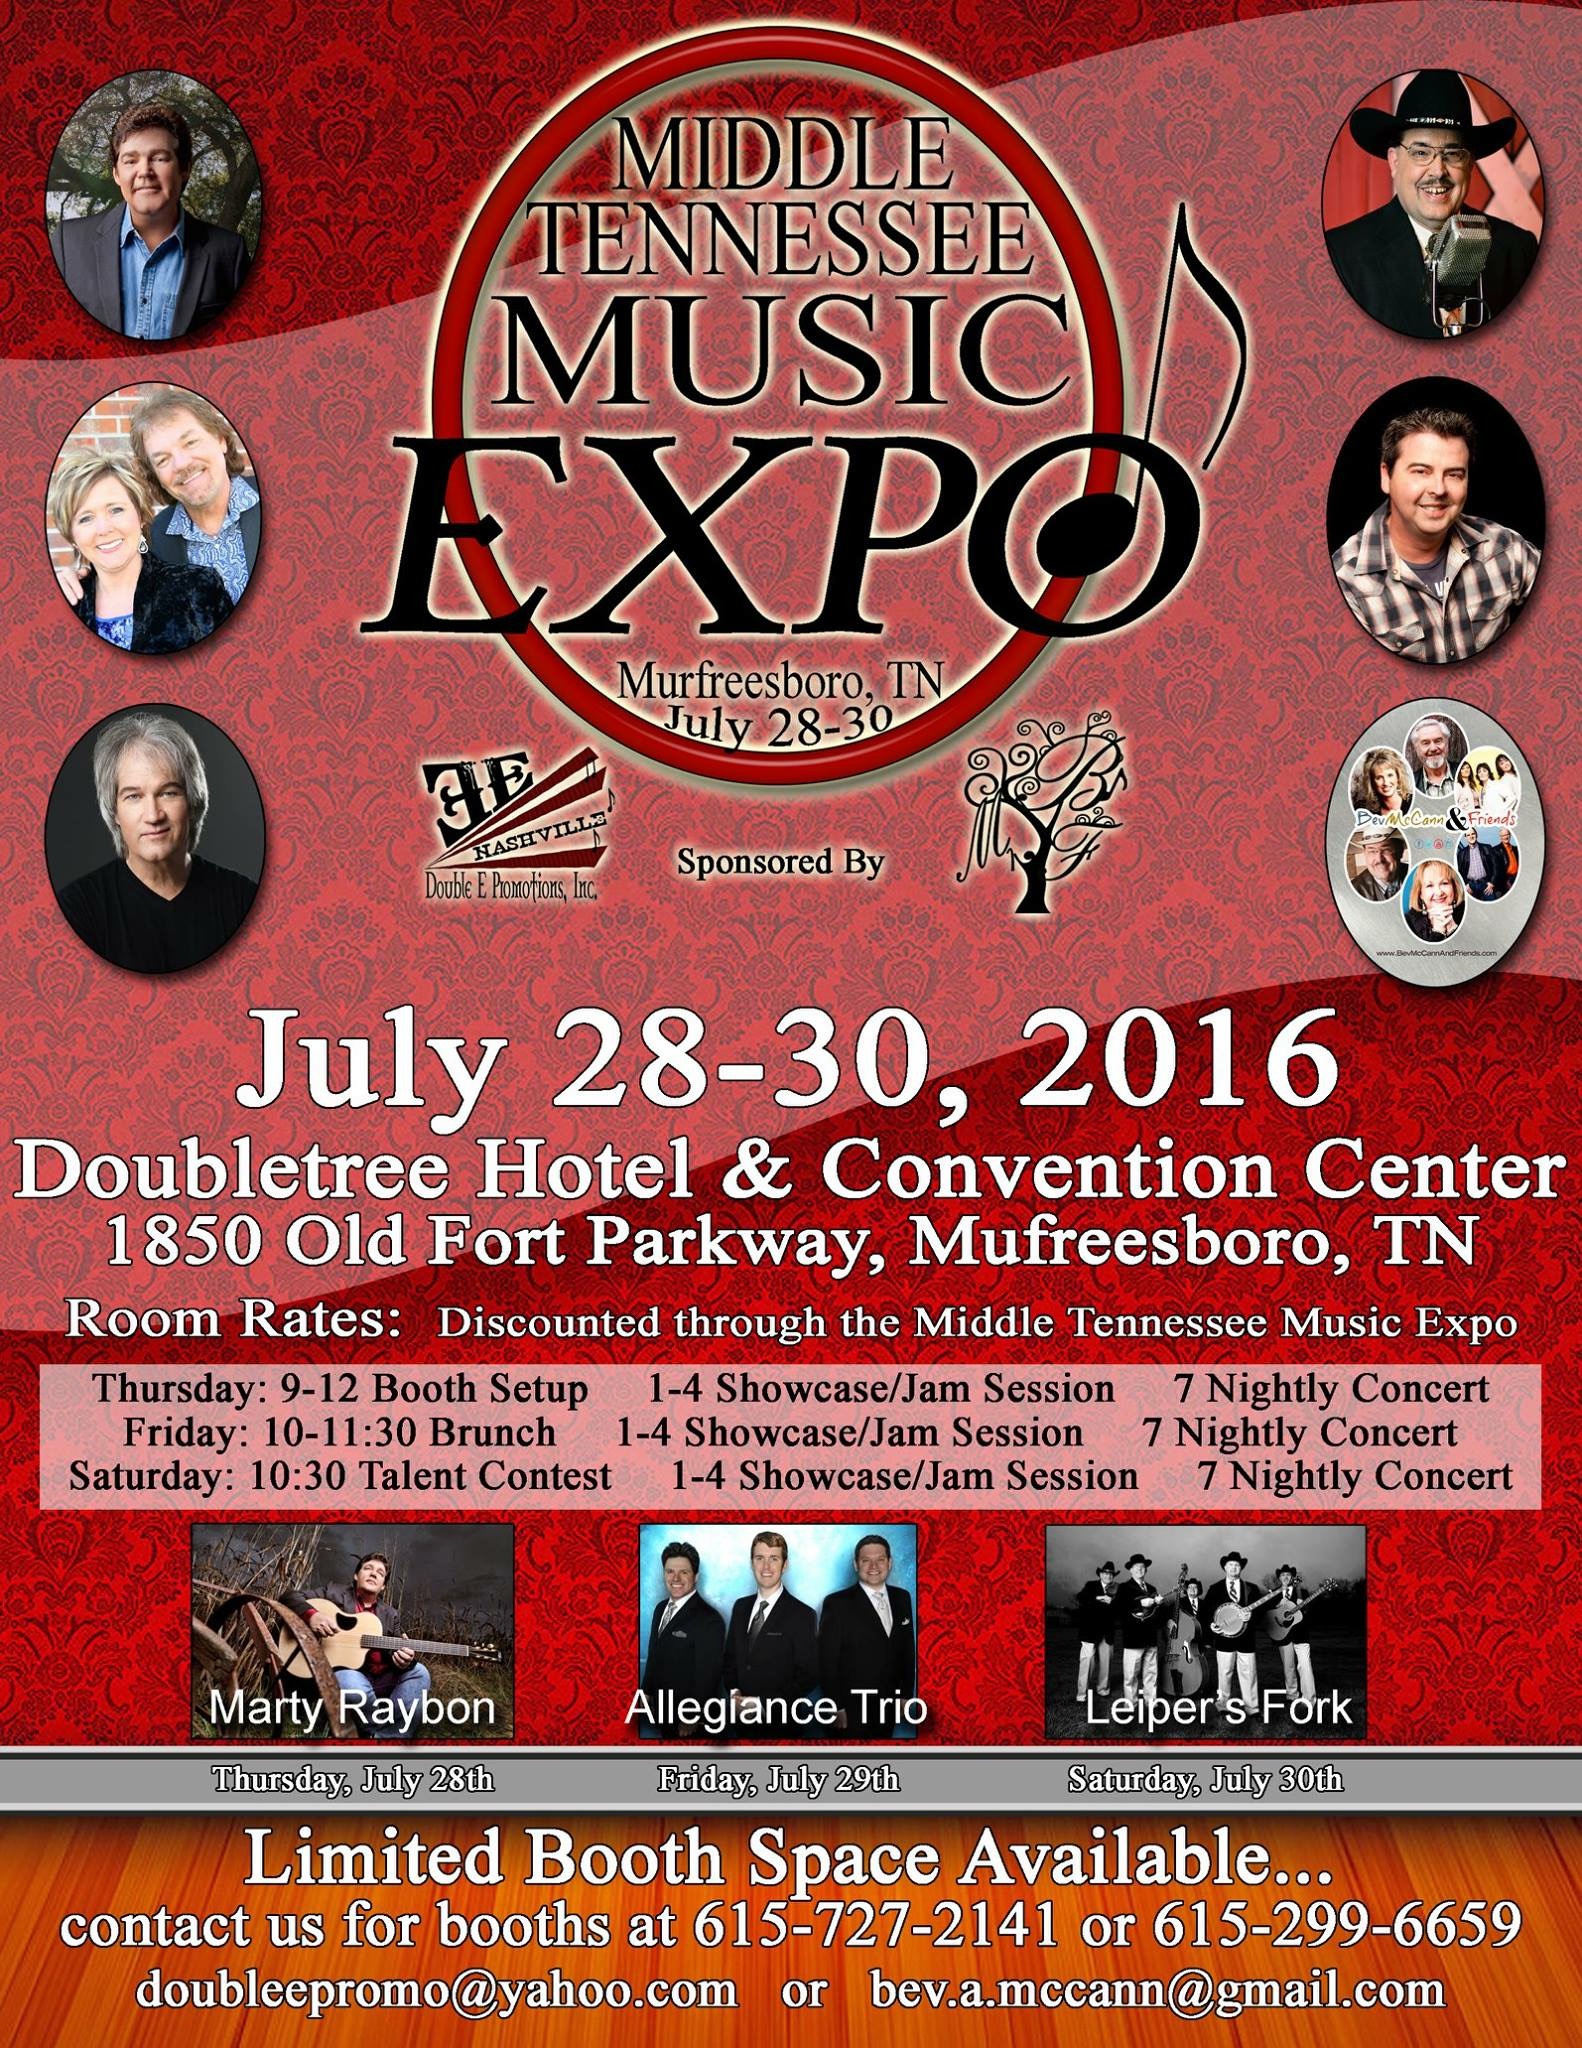 Middle Tennessee Music Expo